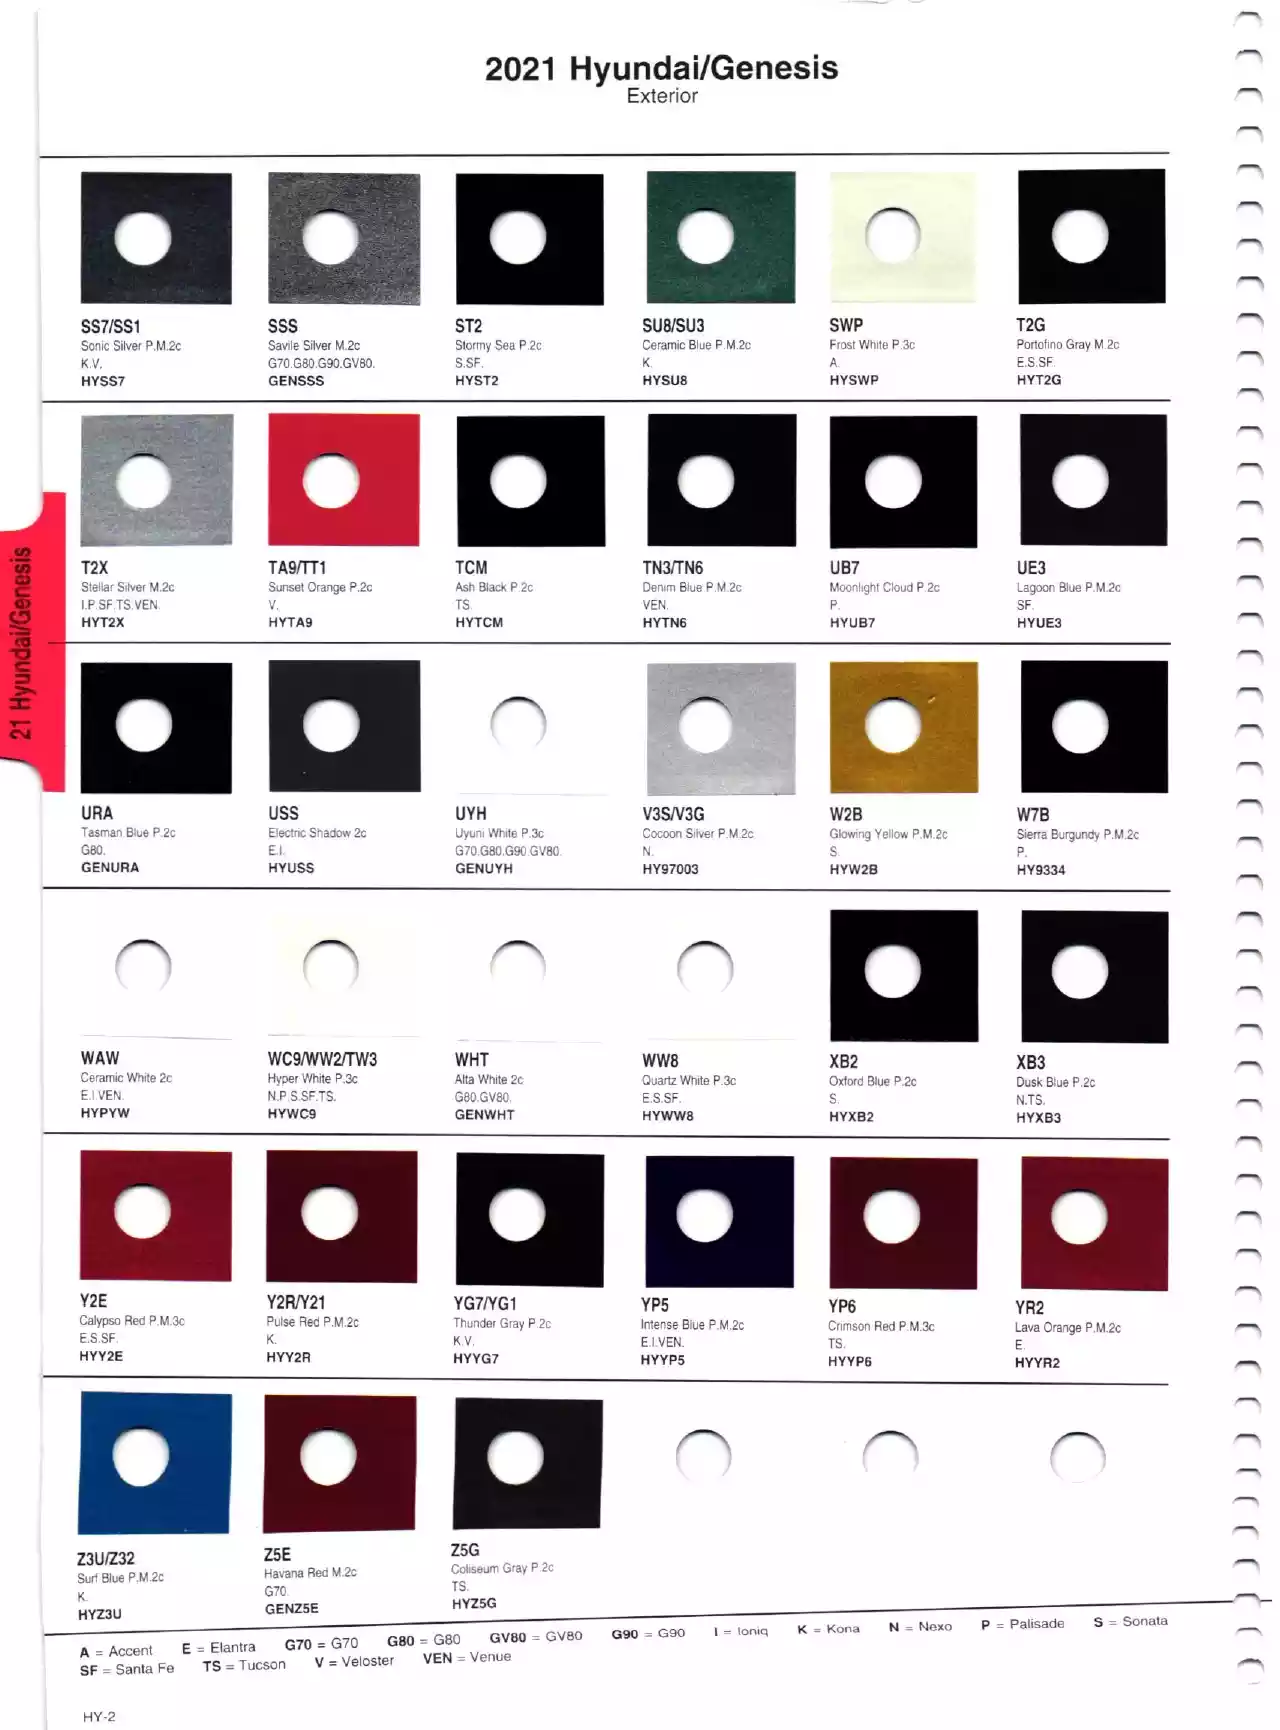 Color swatches, and their ordering paint codes for 2021 model vehicles